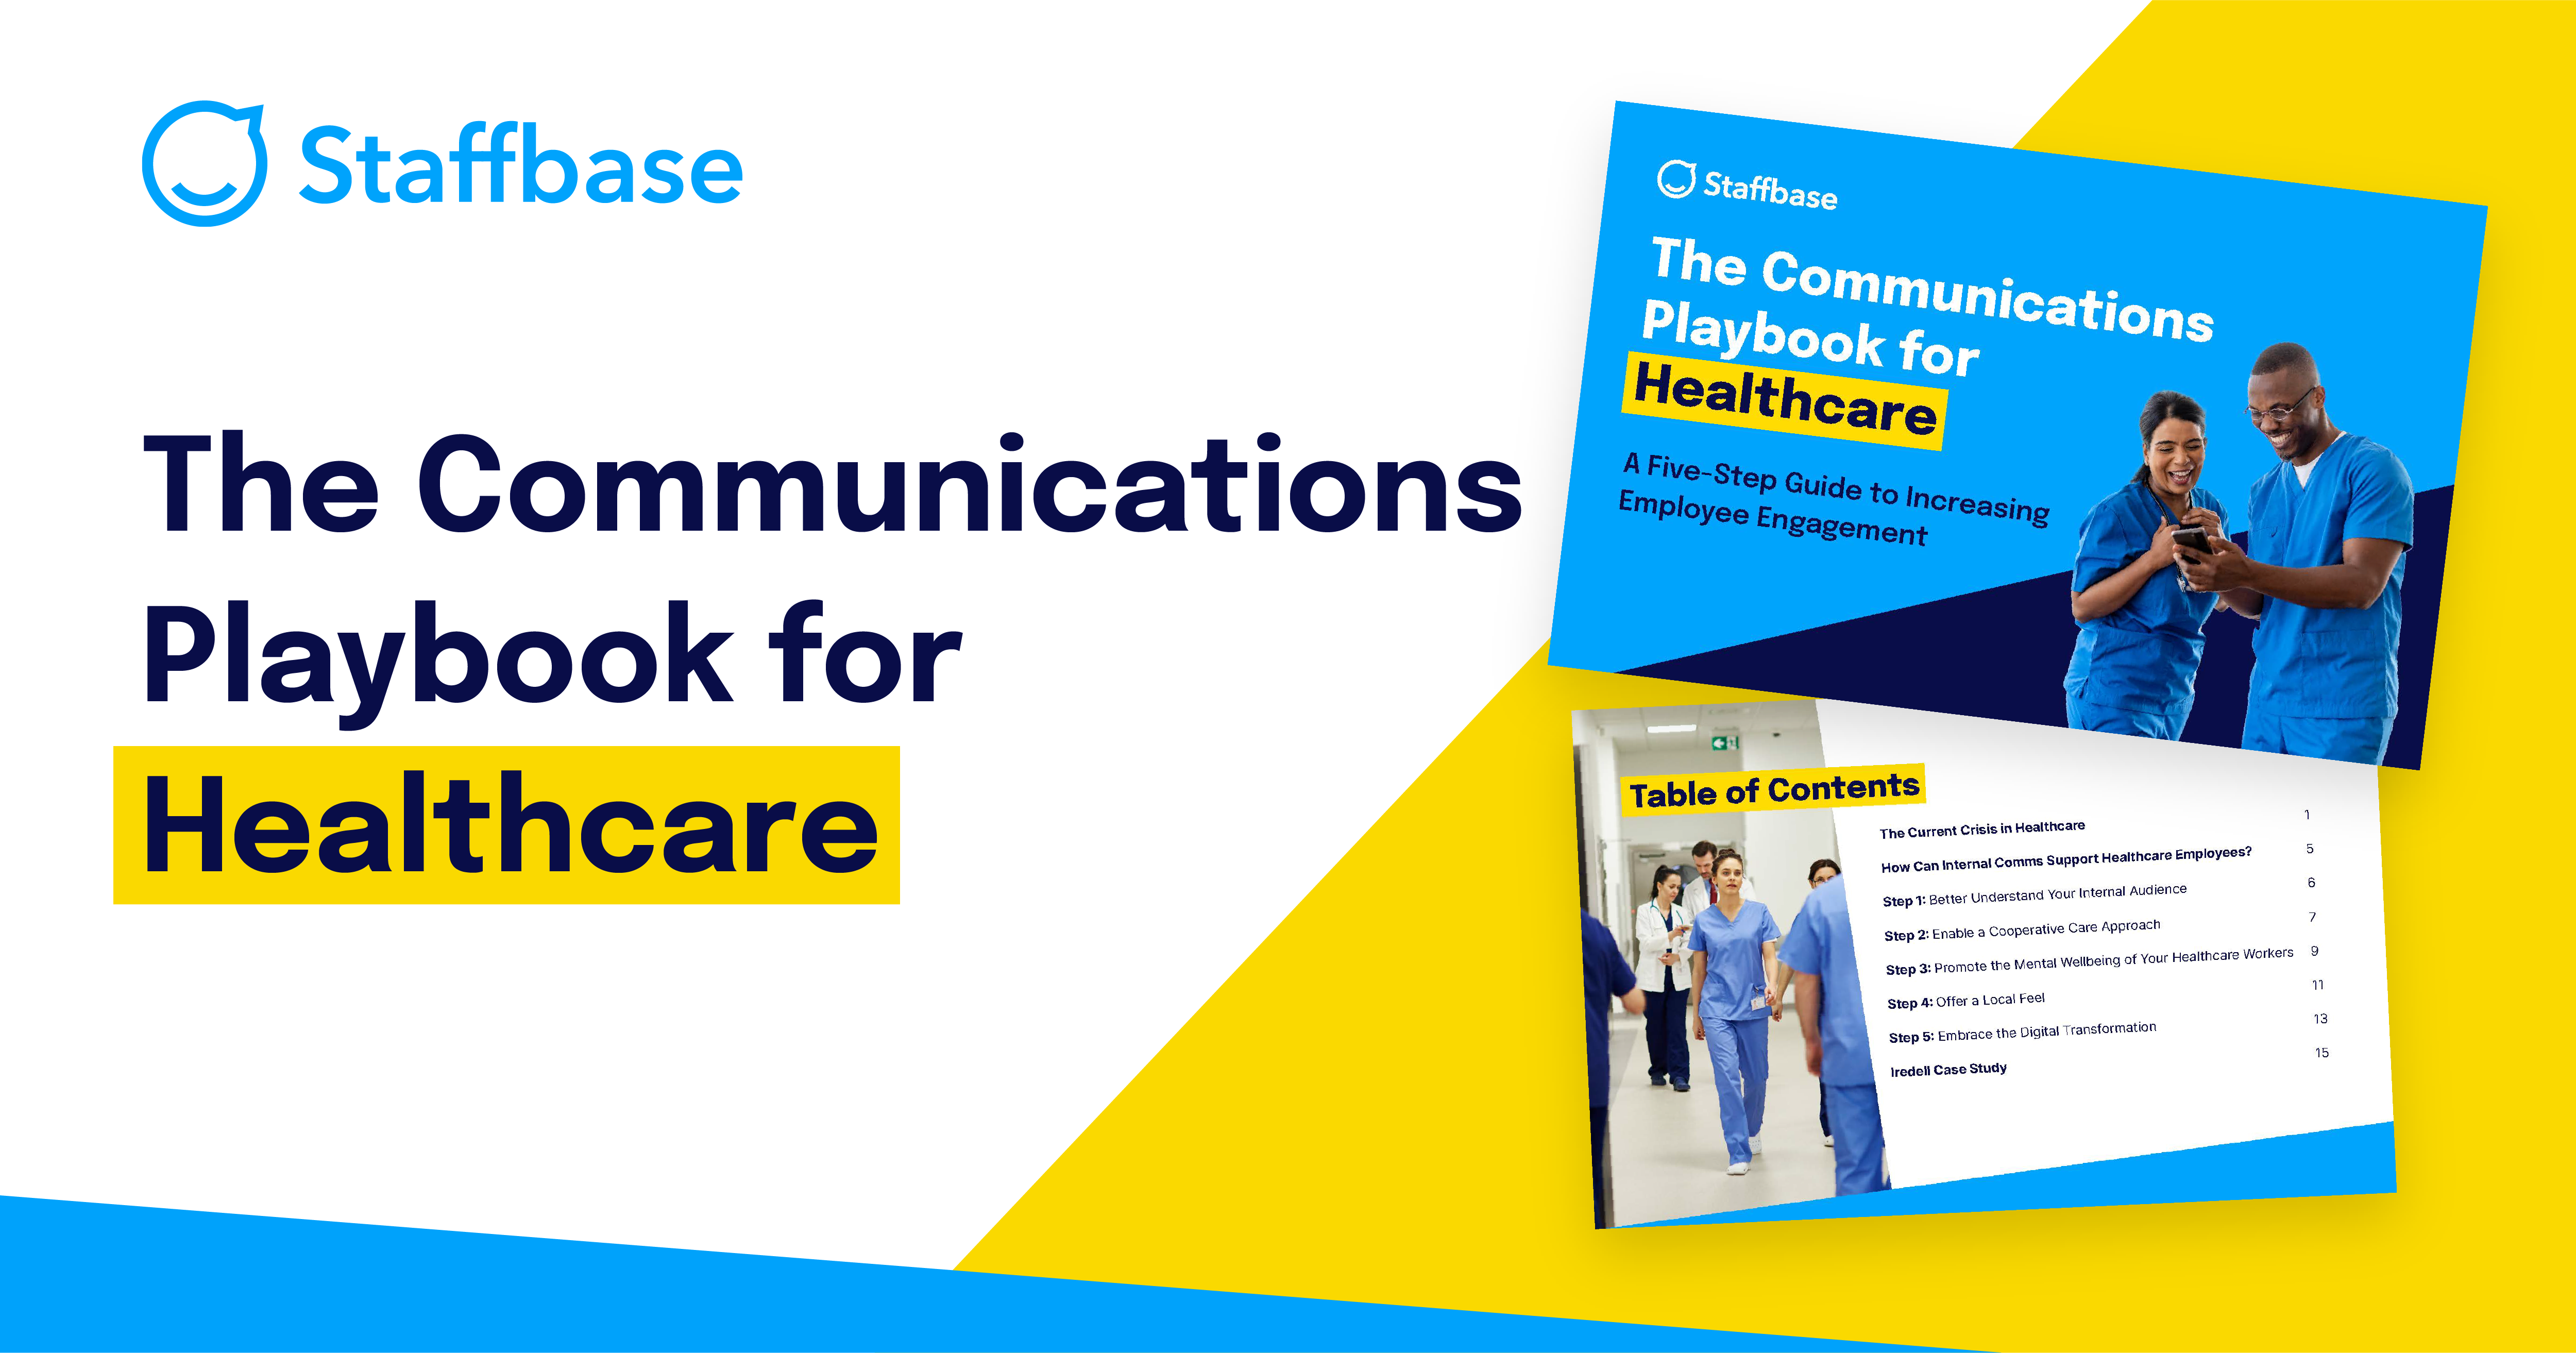 Comms Healthcare Playbook